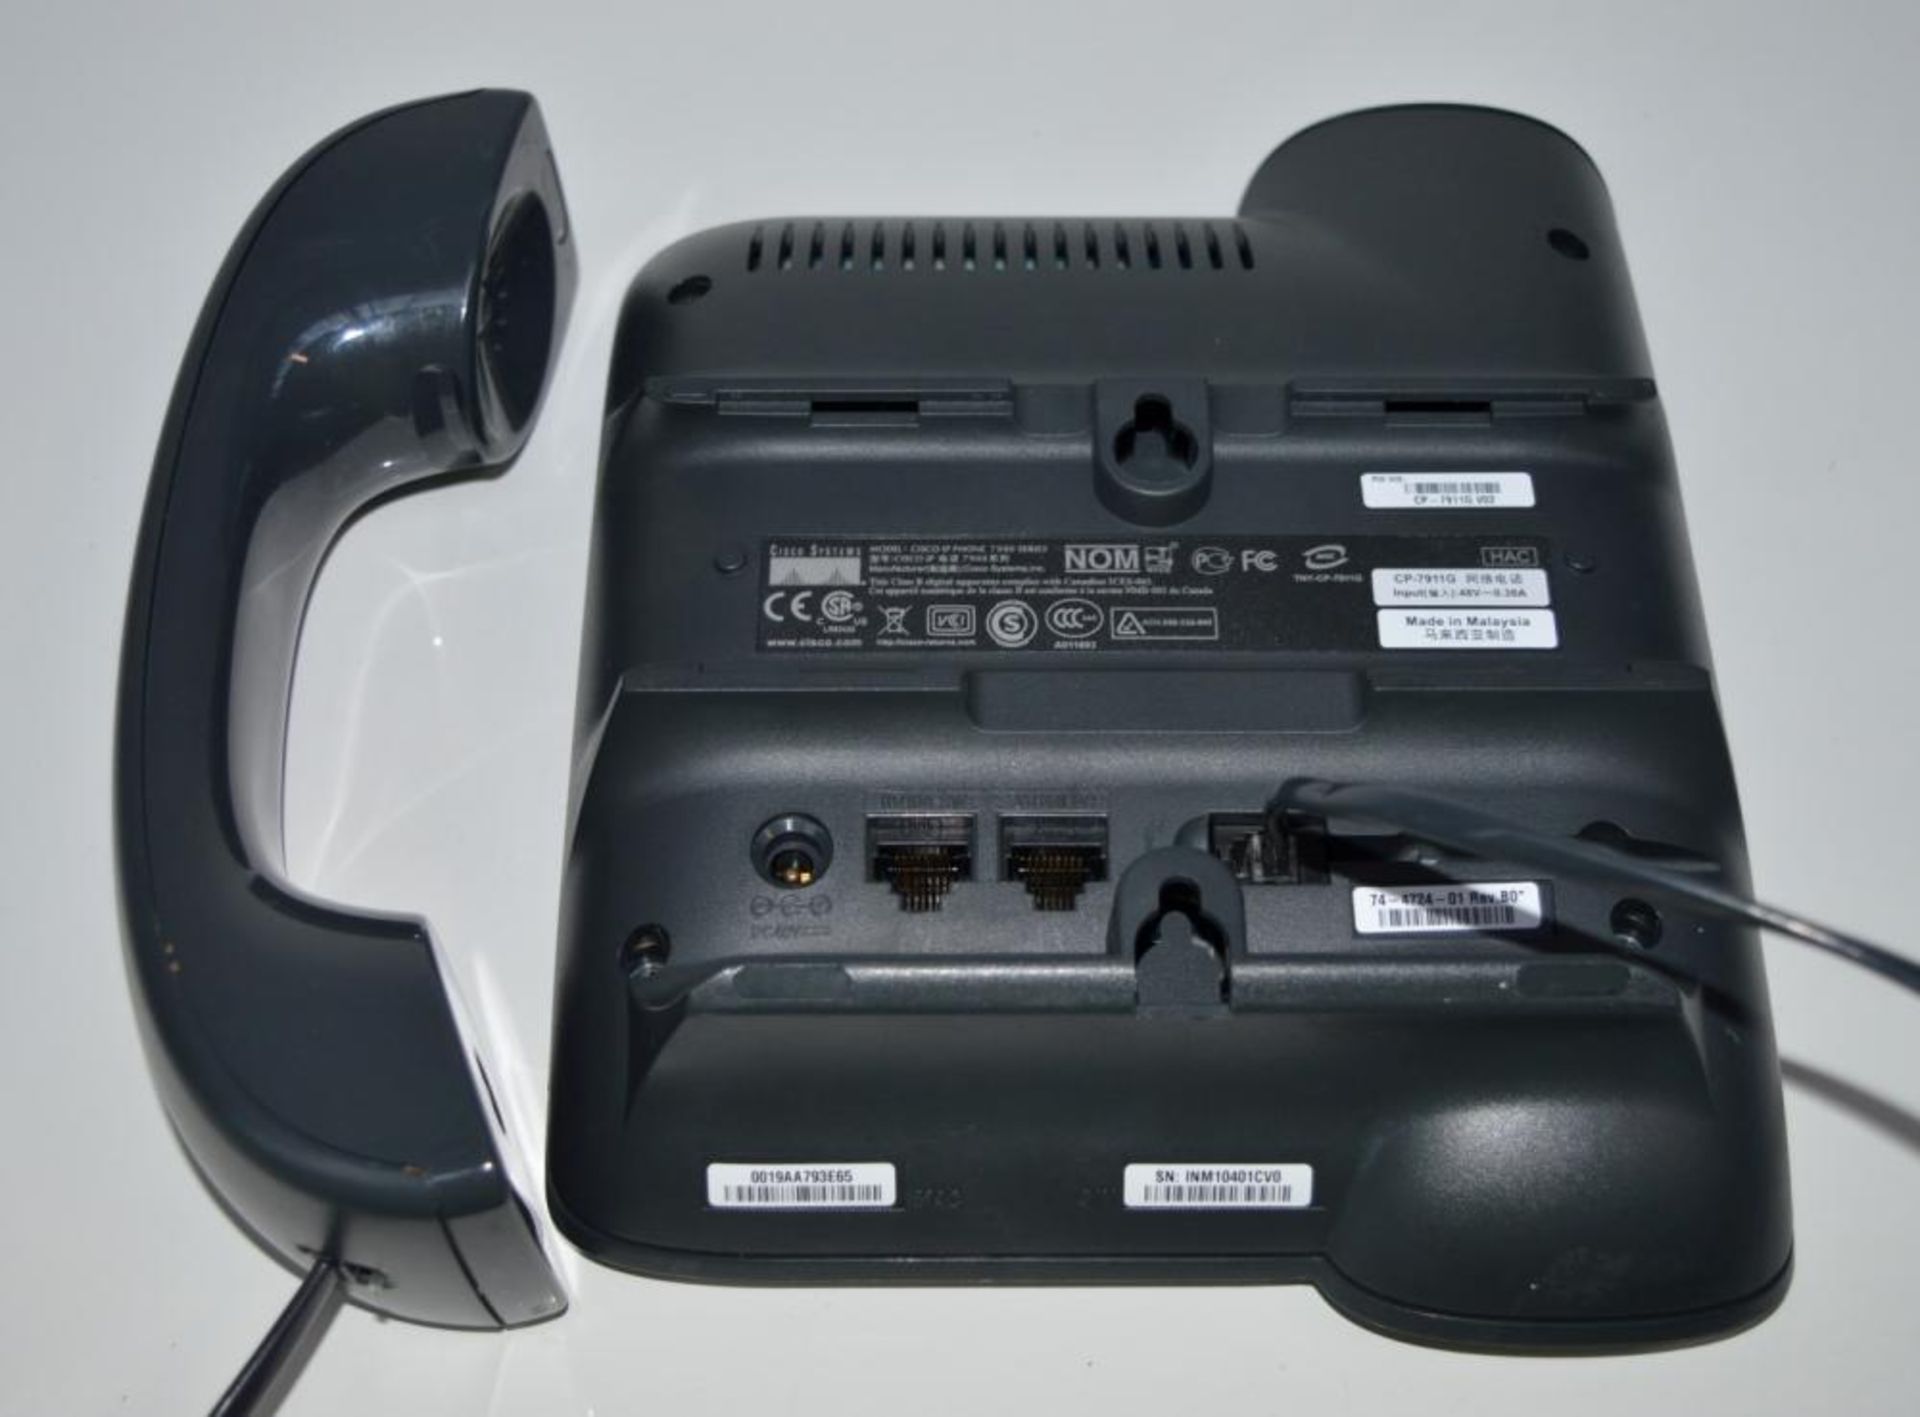 4 x Cisco CP-7911G Unified IP SIP Phones - Removed From a Working Office Environment in Good - Image 2 of 8